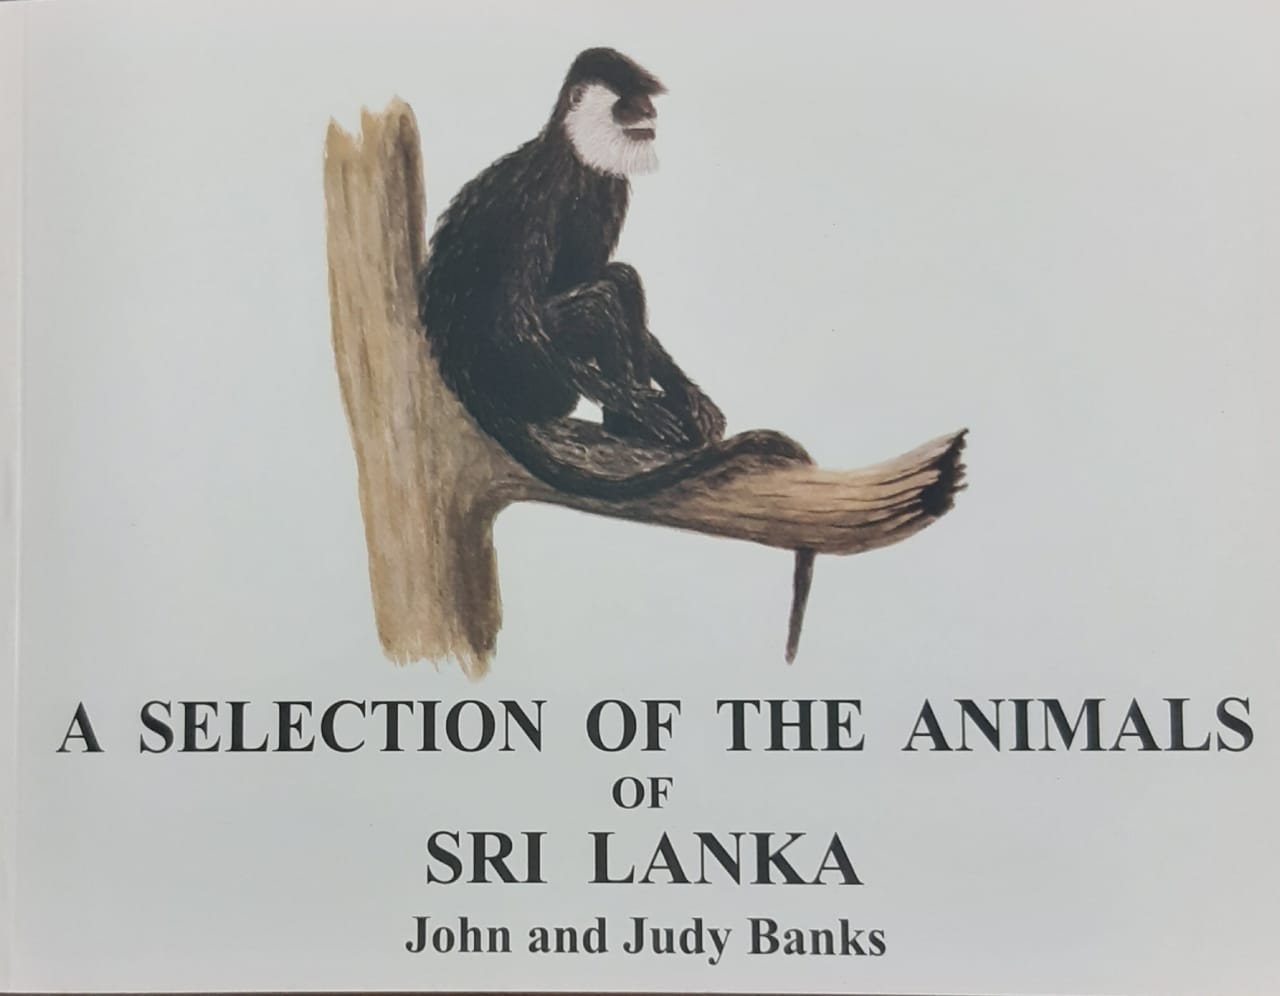 A Selection of the Animals of Sri Lanka